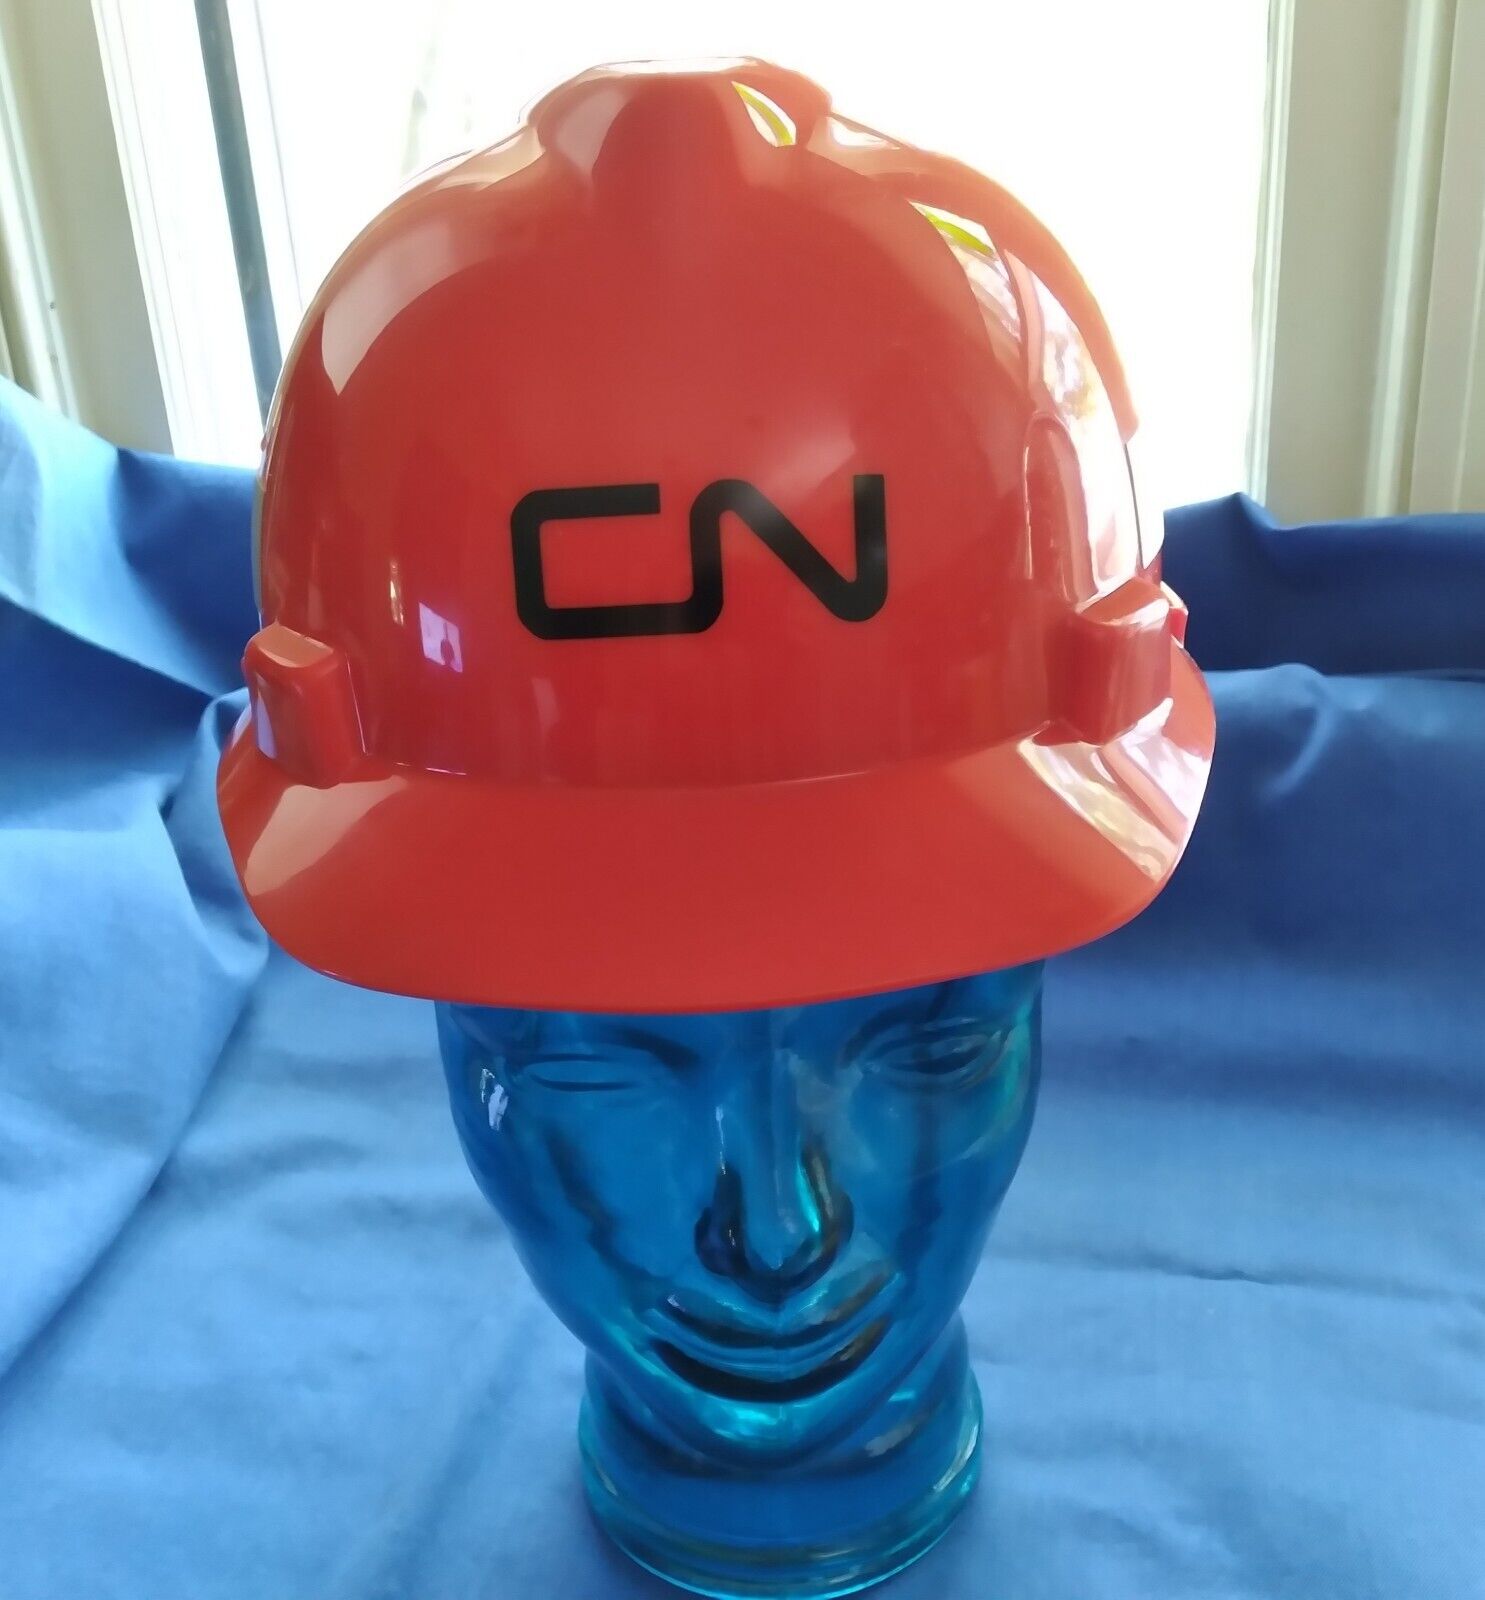 CN Railway Railroad Train Hard Hat NEW OLD STOCK Safety Helmet MINT CONDITION